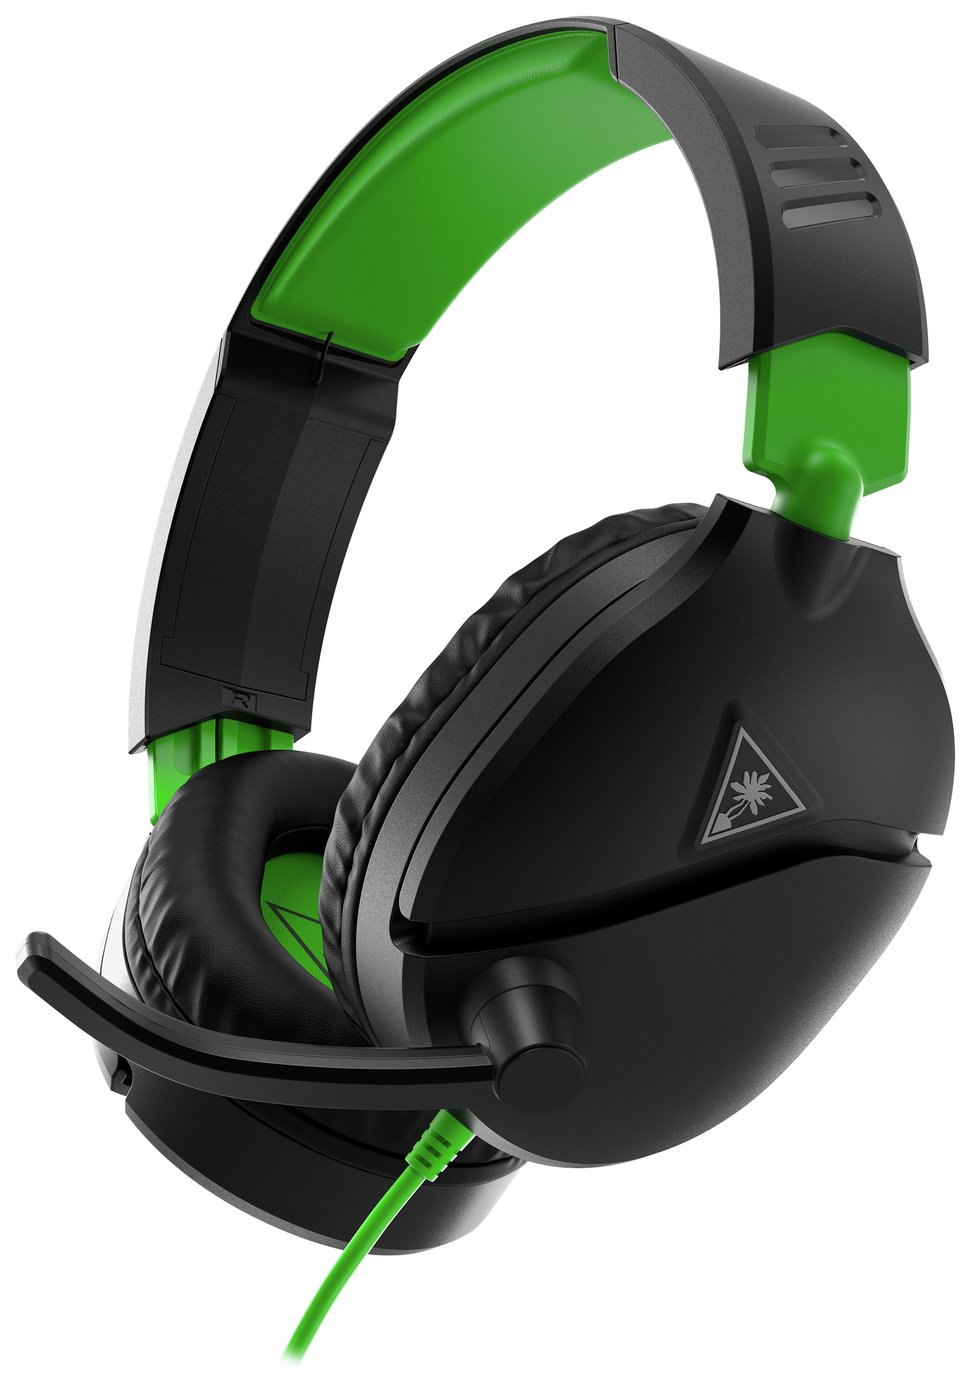 can i use xbox turtle beaches on ps4